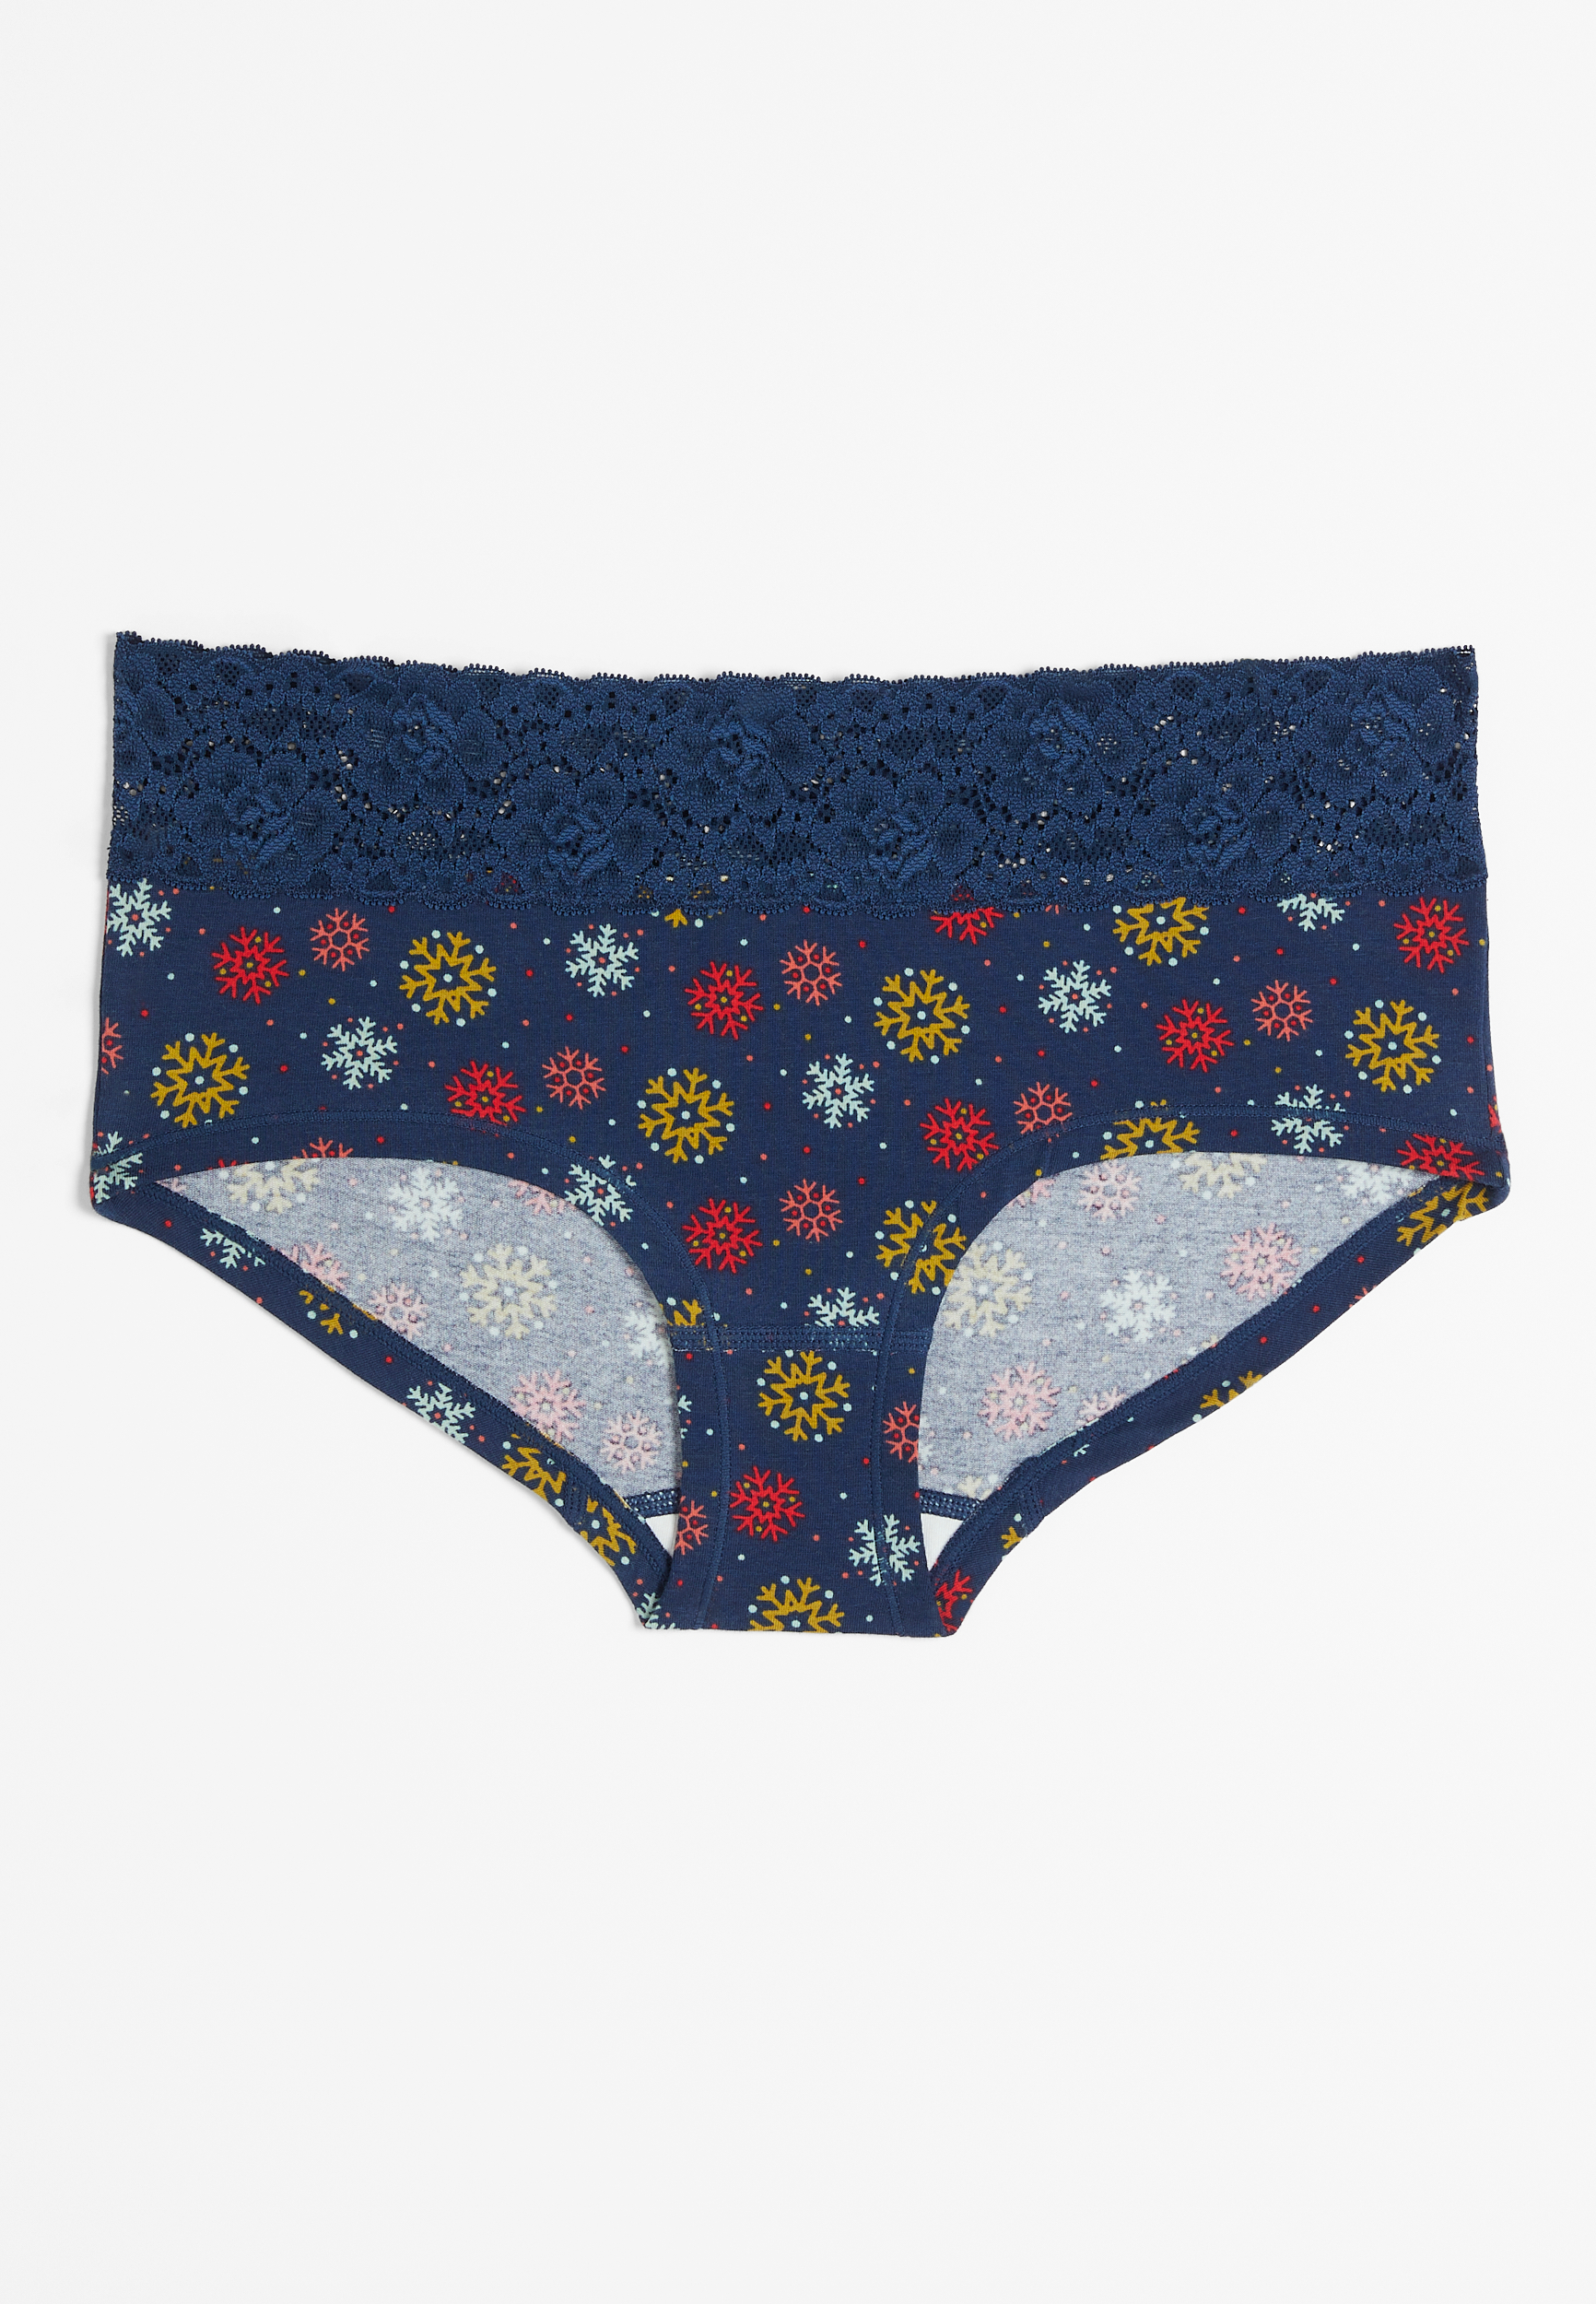 Simply Comfy Wide Lace Trim Snowflake Boybrief Cotton Panty | maurices